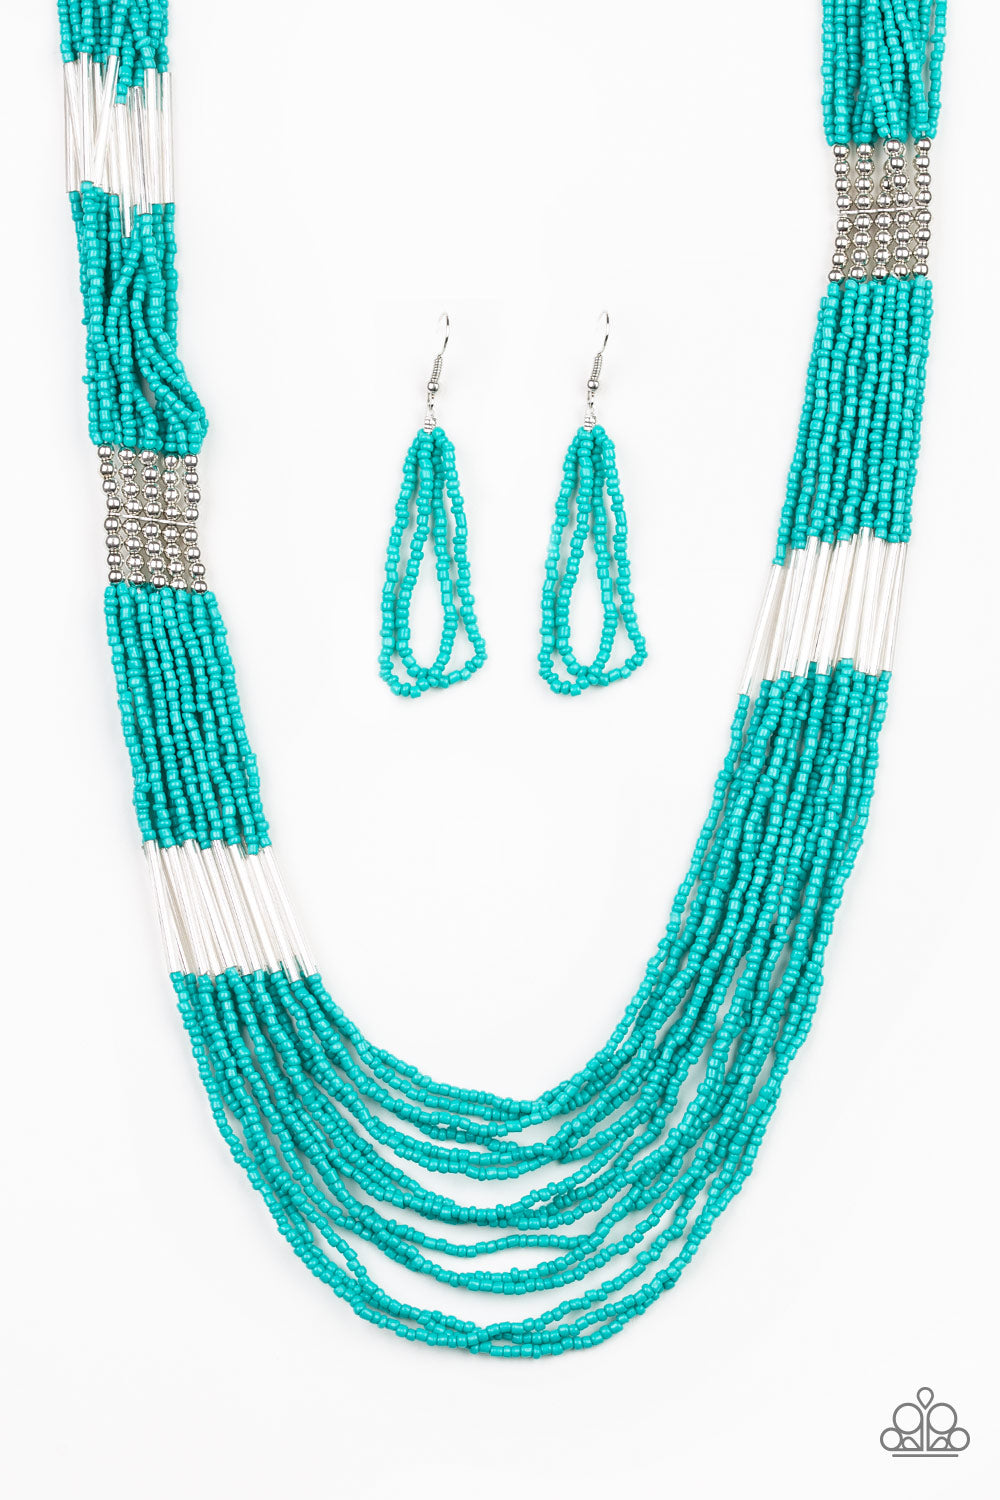 Let It BEAD - Blue seed bead necklace